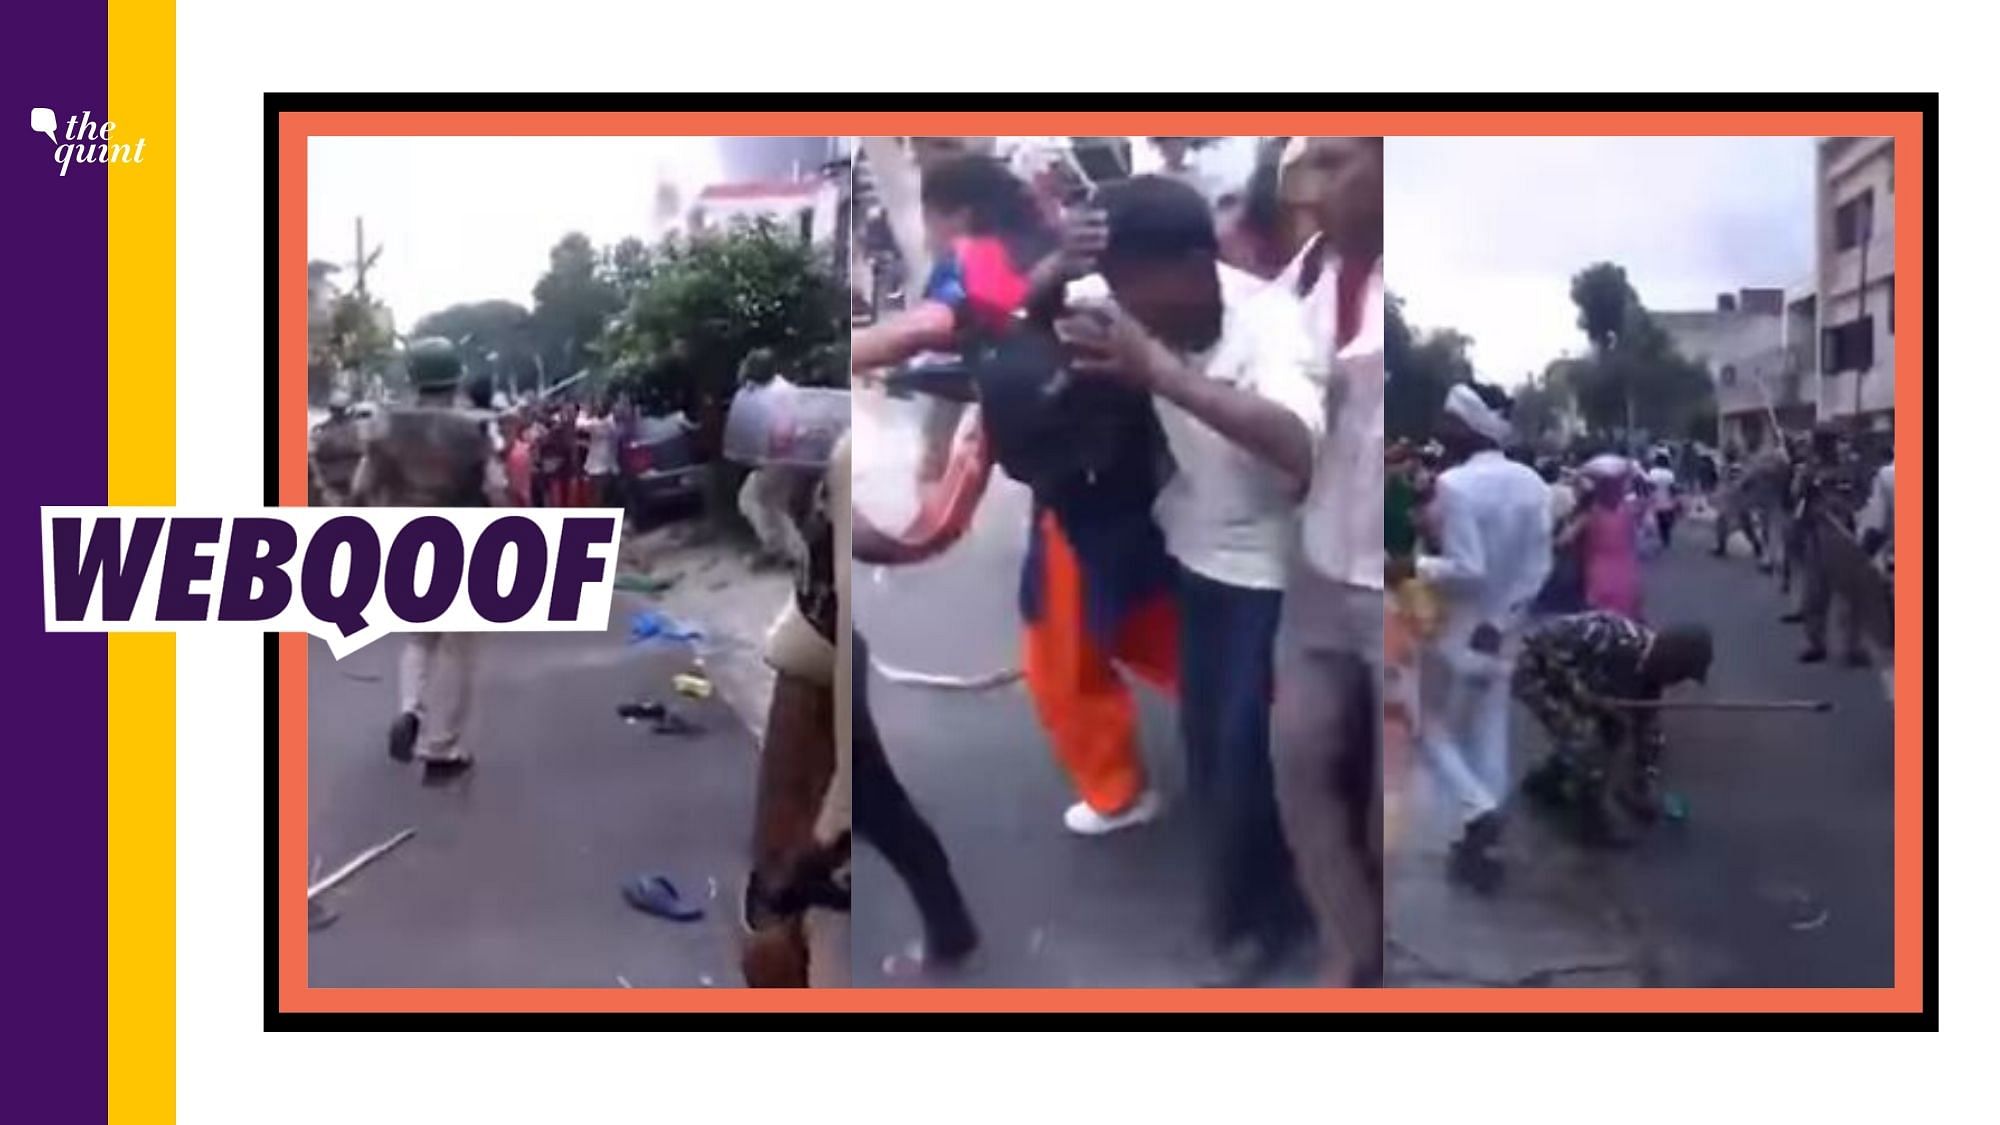 A video which shows police beating people is being shared on Facebook with a claim that it shows police brutality in Kashmir.